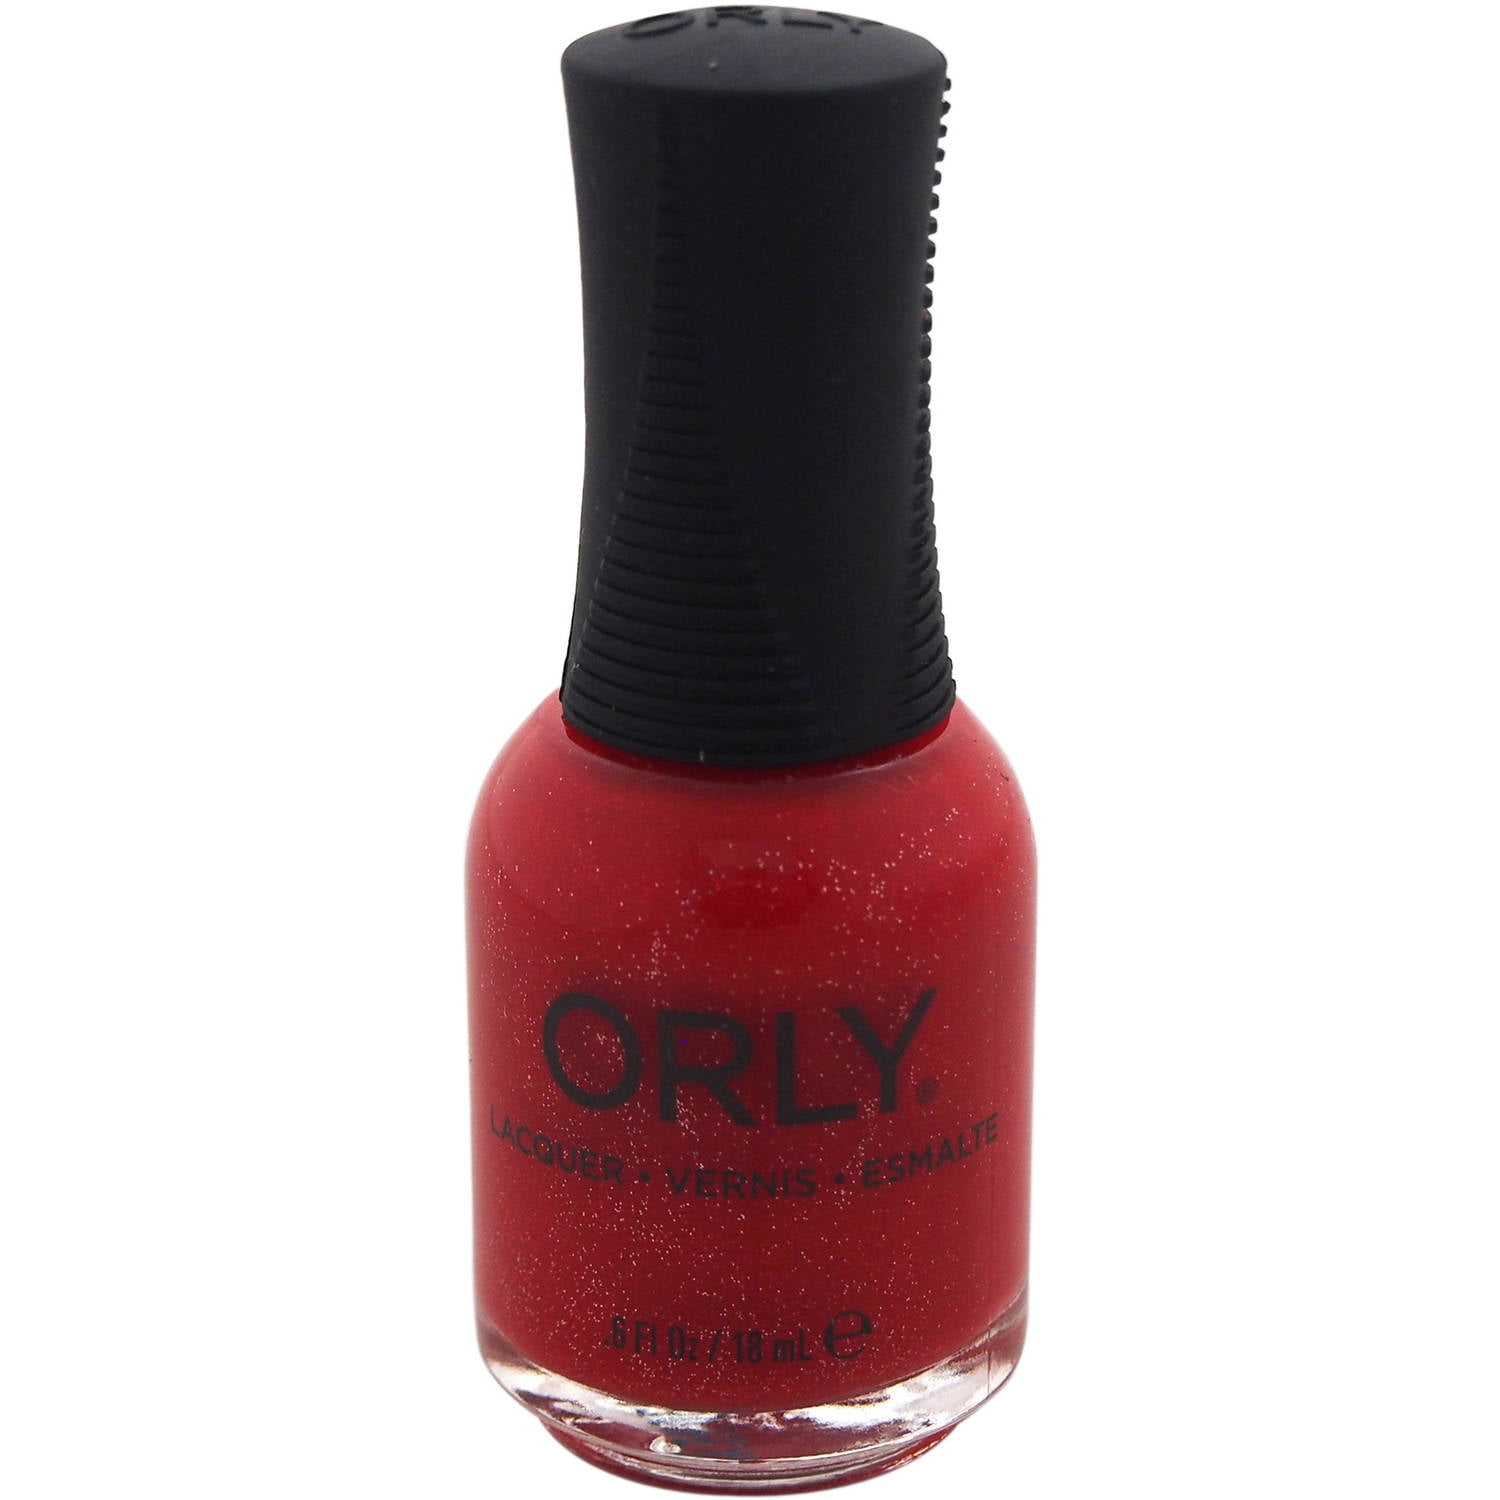 ORLY Nail Lacquer for Women, #20634 Red Carpet, 0.6 oz - Walmart.com ...